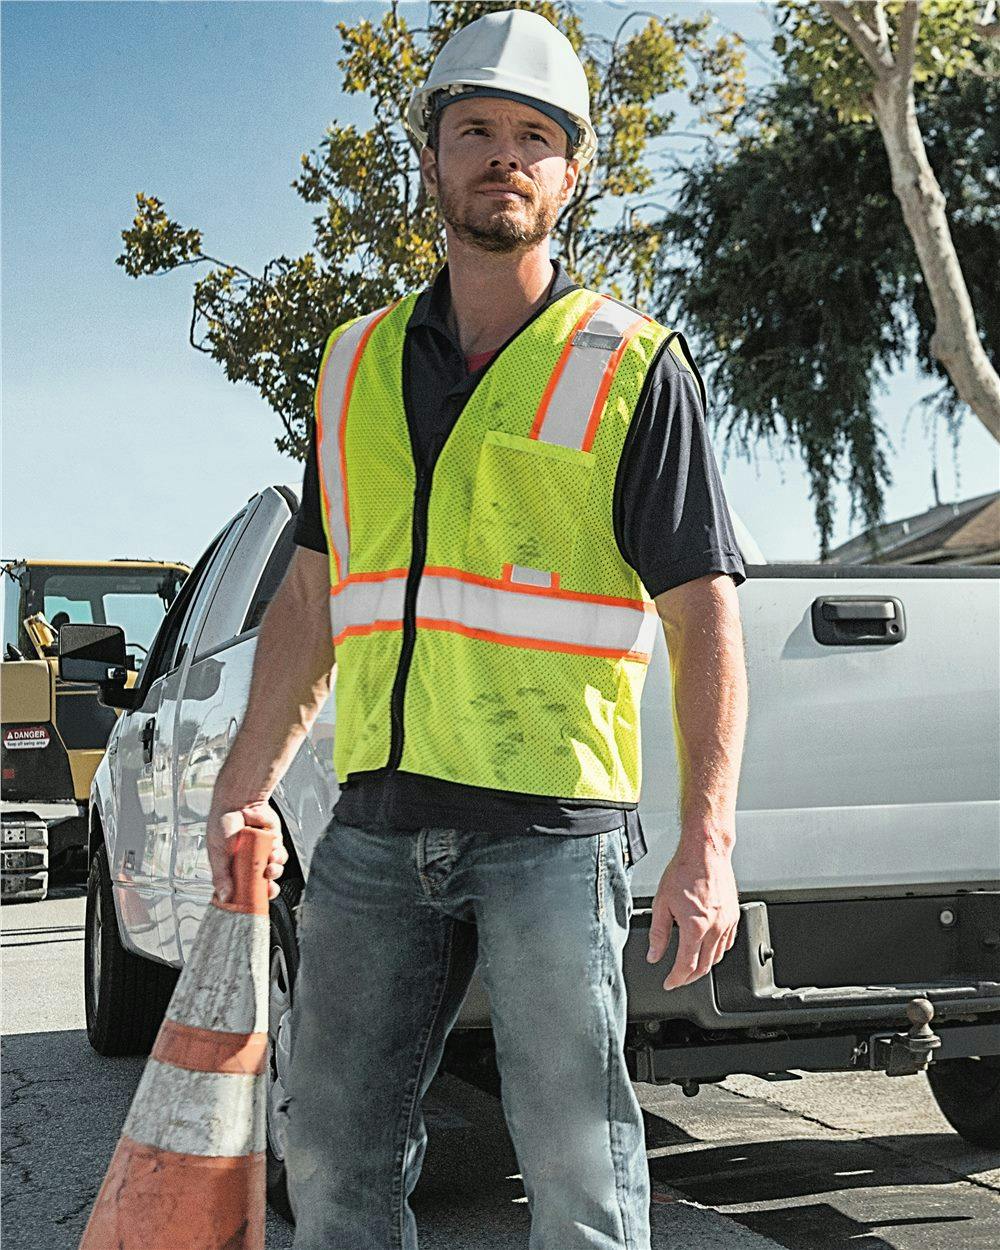 Image for Economy Contrasting Vest with Zippered Front - 1527-1528